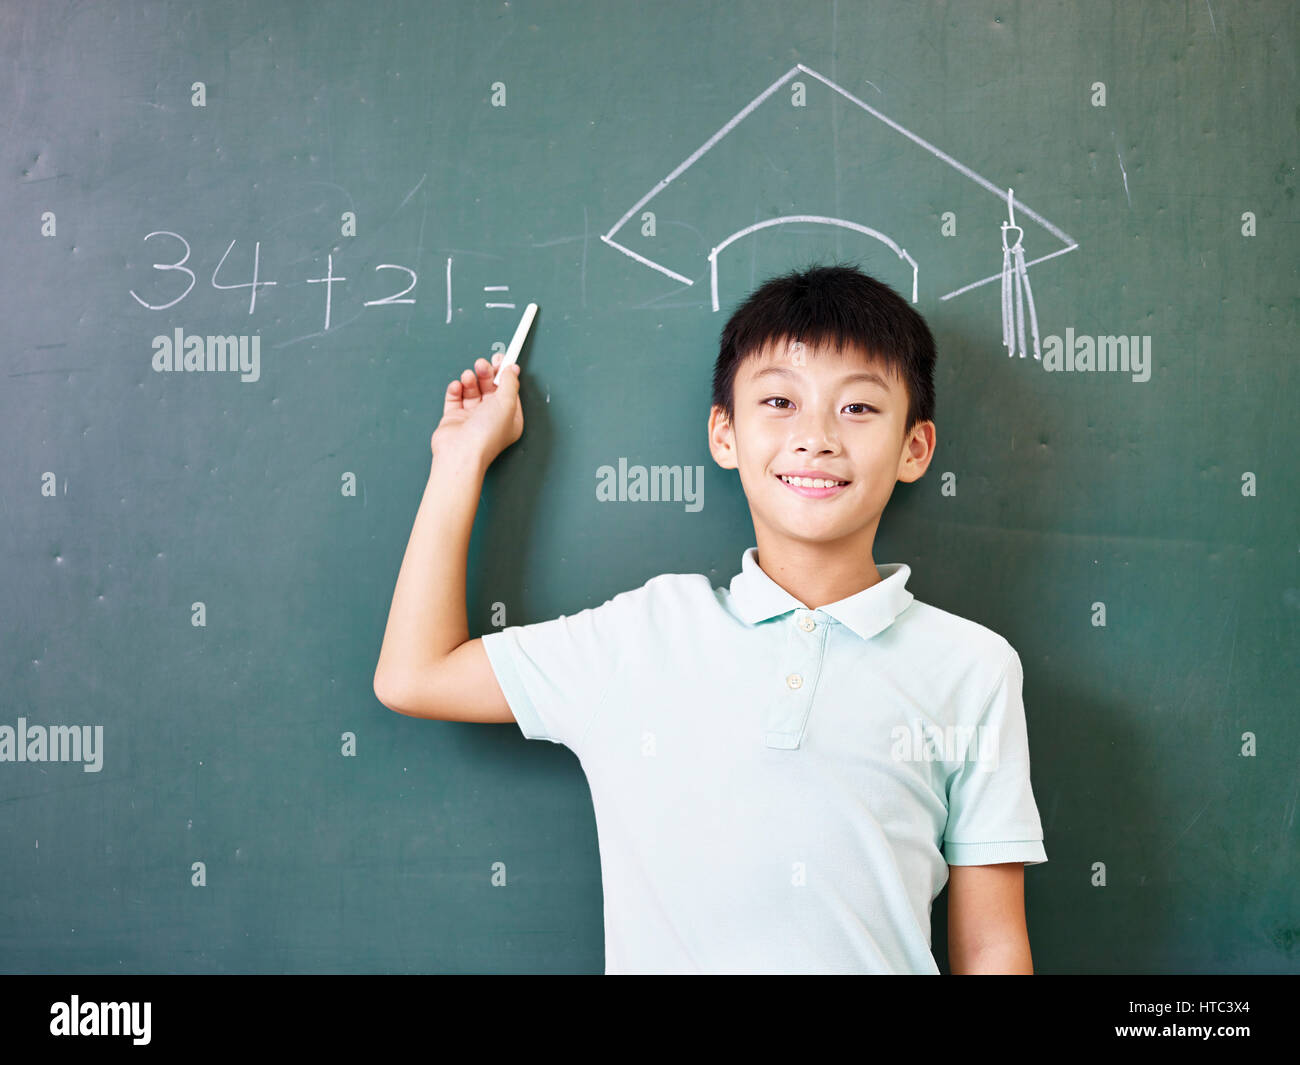 asian elementary school boy standing under a doctoral hat drawn with chalk on blackboard. Stock Photo